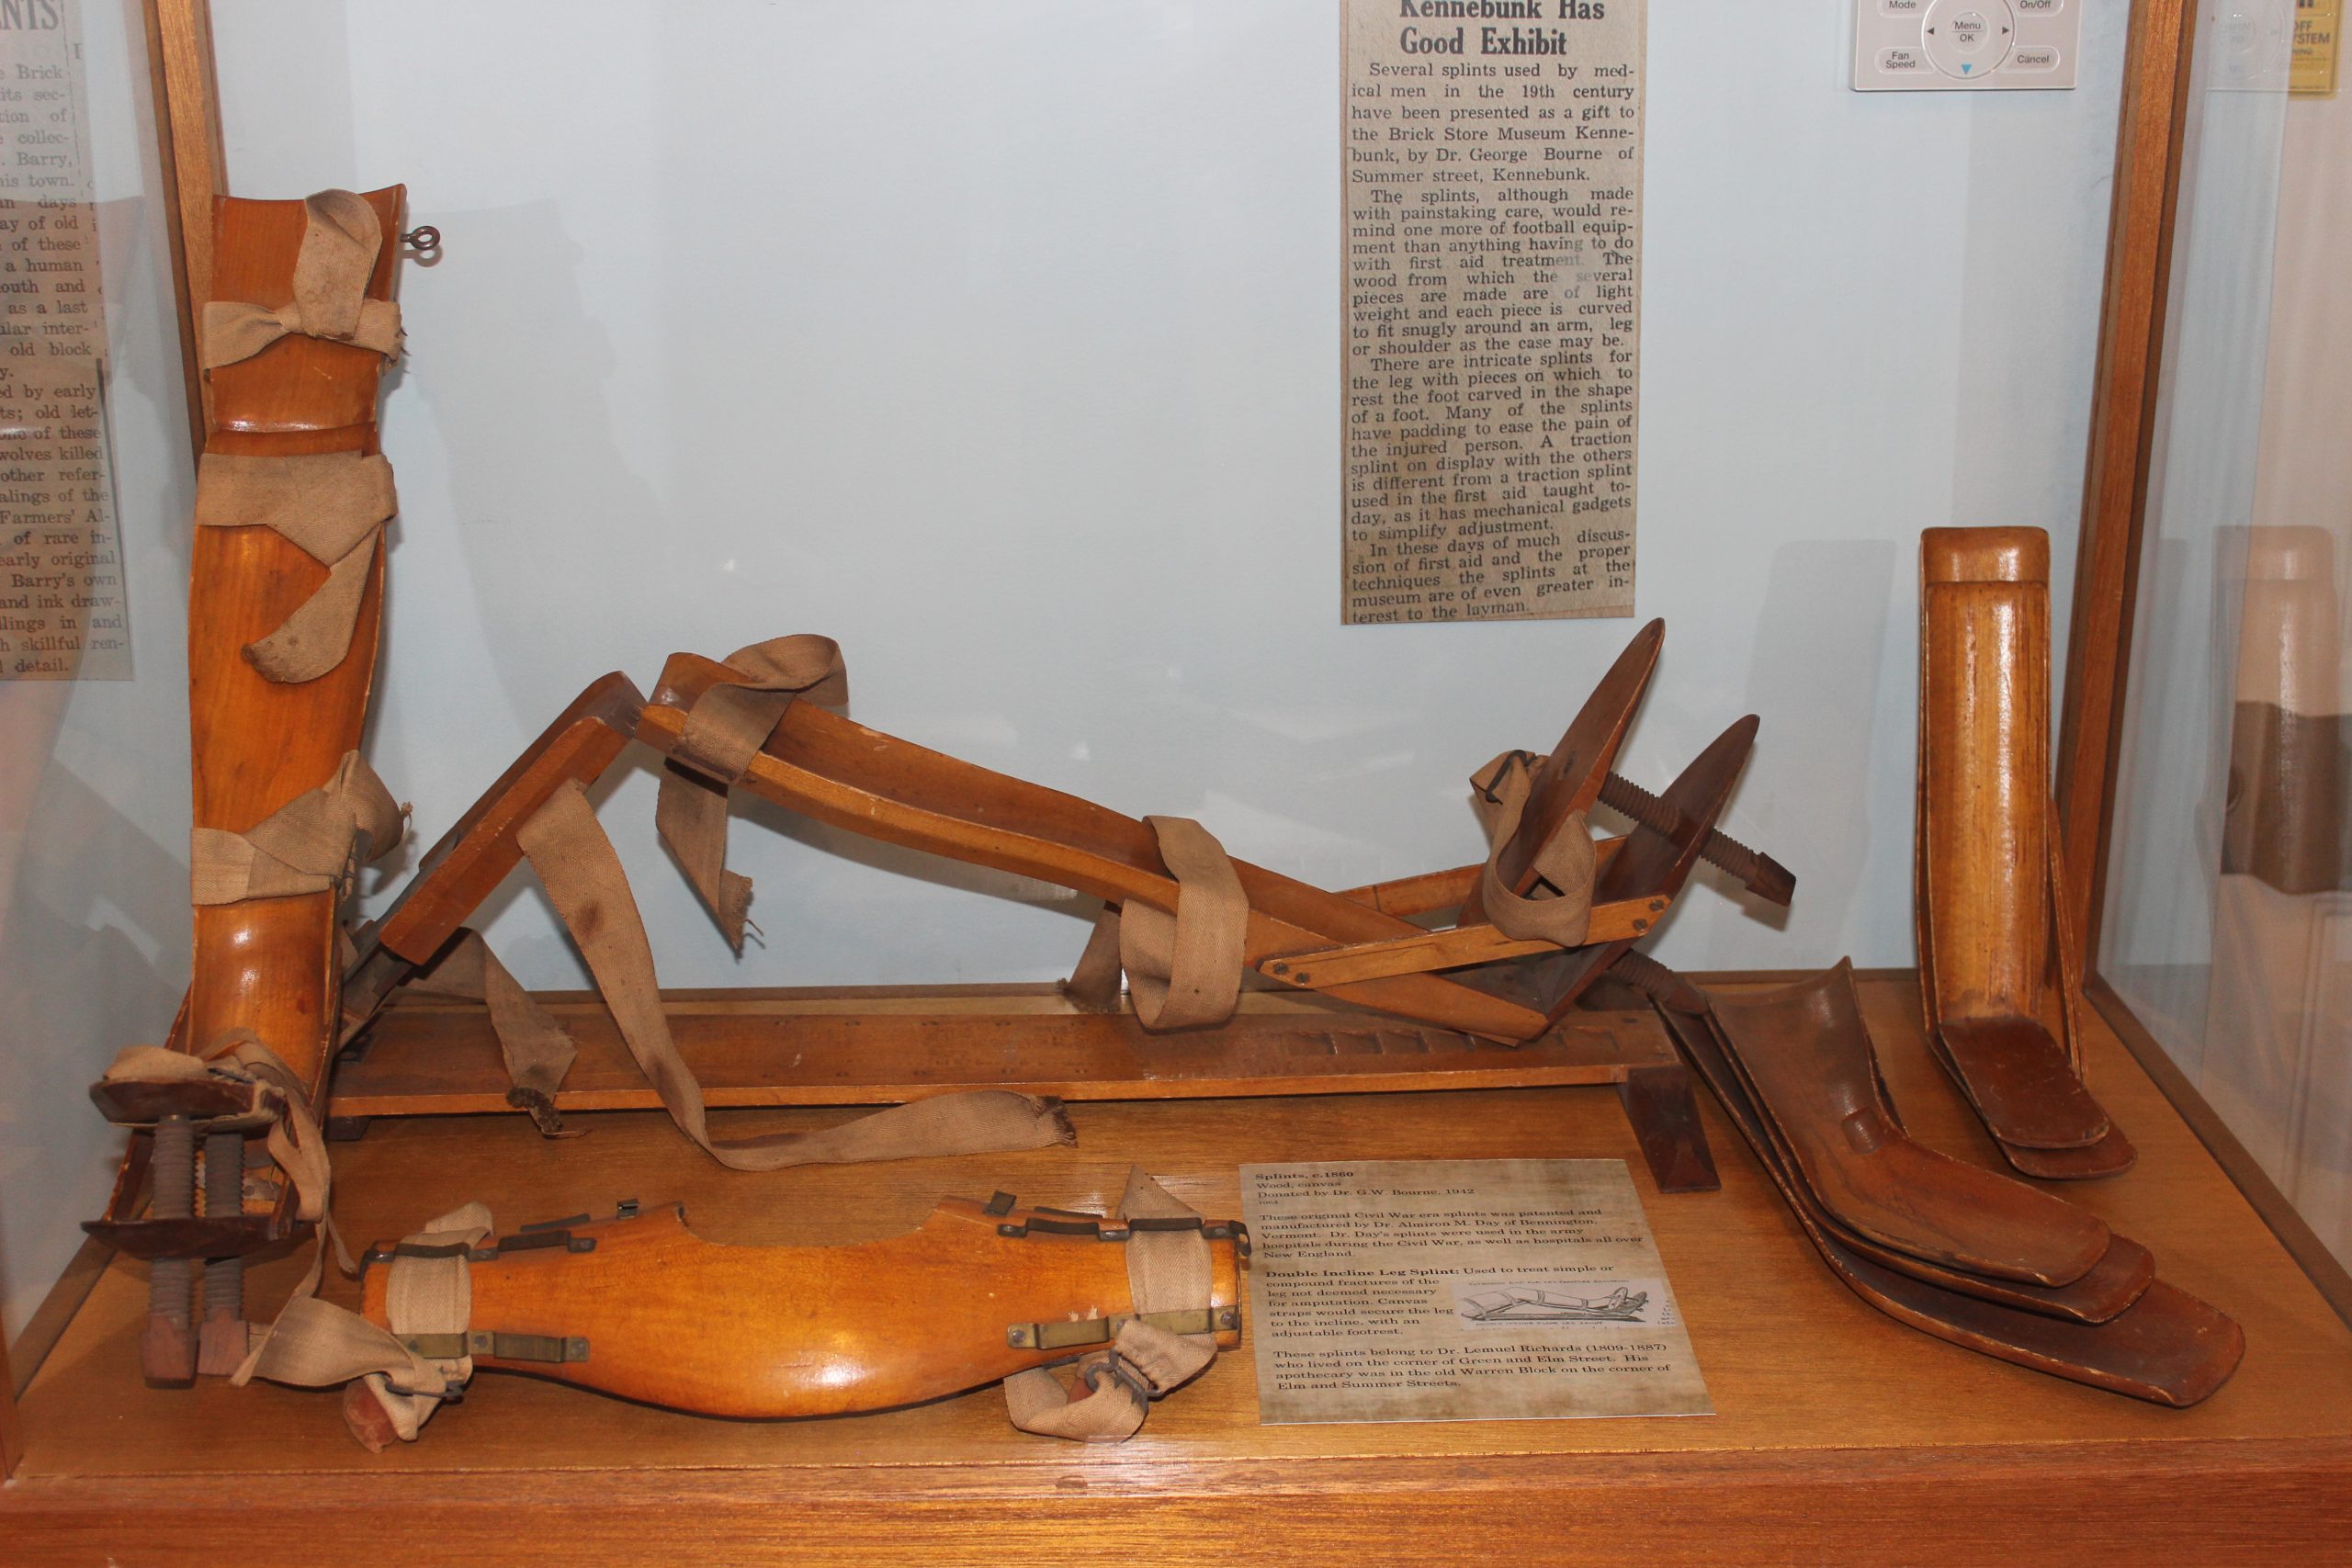 Splints c.1860 Wood and canvas, donated by Dr. G. W. Bourne in 1942 These original Civil War era splints was patented and manufactured by Dr. Almiron M. Day of Bennington, Vermont. Dr. Day's splints were used in the army hospitals during the Civil War, as well as hospitals all over New England. Double Incline Leg Splint Used to treat simple or compound fractures of the leg not deemed necessary for amputation. Canvas straps would secure the leg to the incline, with an adjustable footrest. These splints belong to Dr. Lemuel Richards (1809-1887) who lived on the corner of Green and Elm Street. 